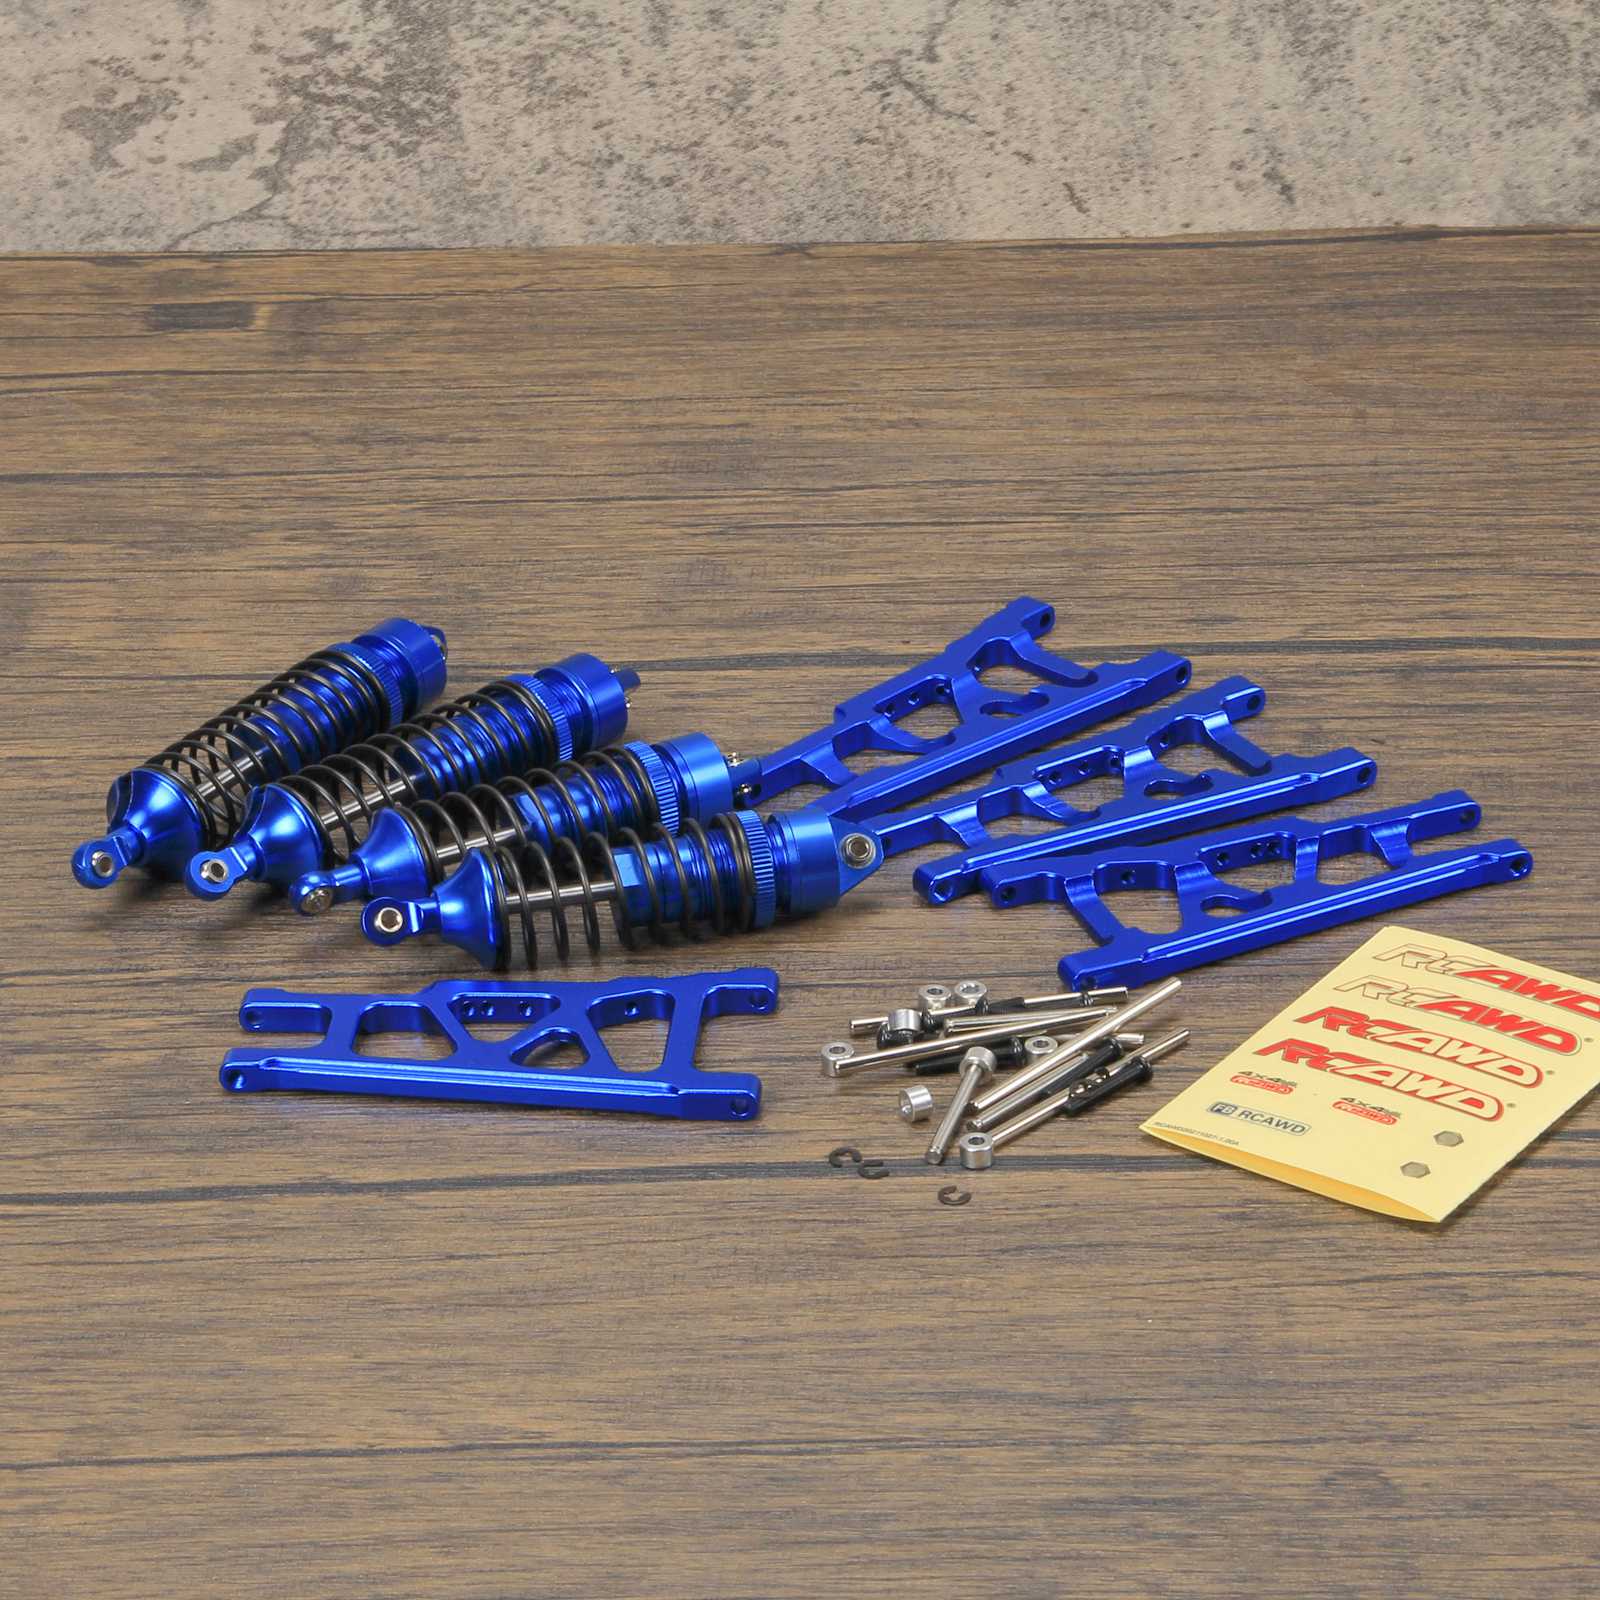 RCAWD TRAXXAS SLASH 4WD Dark blue RCAWD Aluminum Suspension Arms Set and Full Metal Shock Absorber Assembled for 1/10 Traxxas Slash 4x4